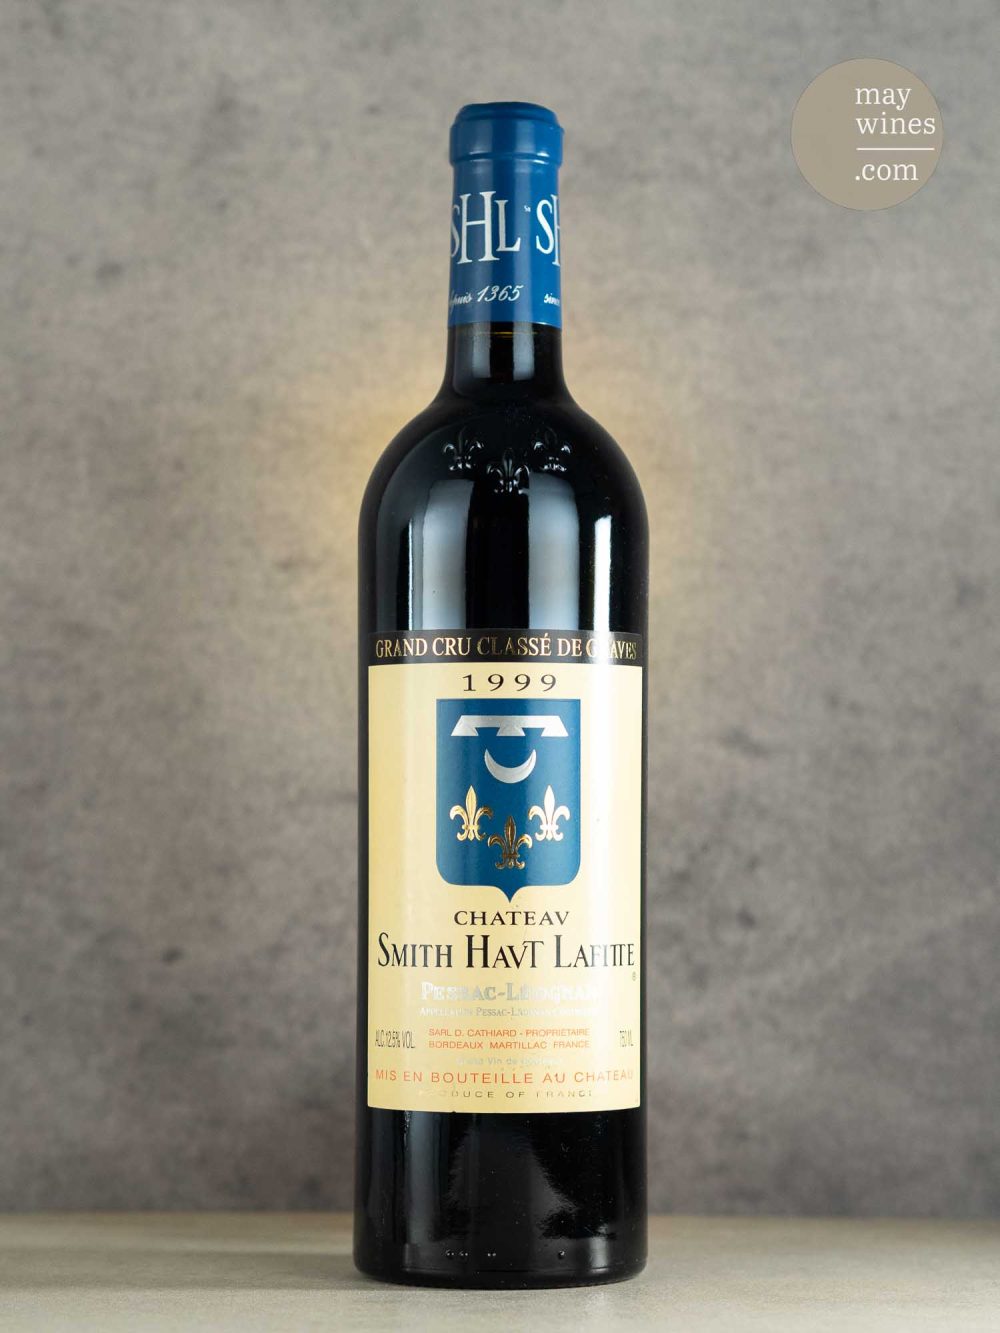 May Wines – Rotwein – 1999 Château Smith Haut Lafitte